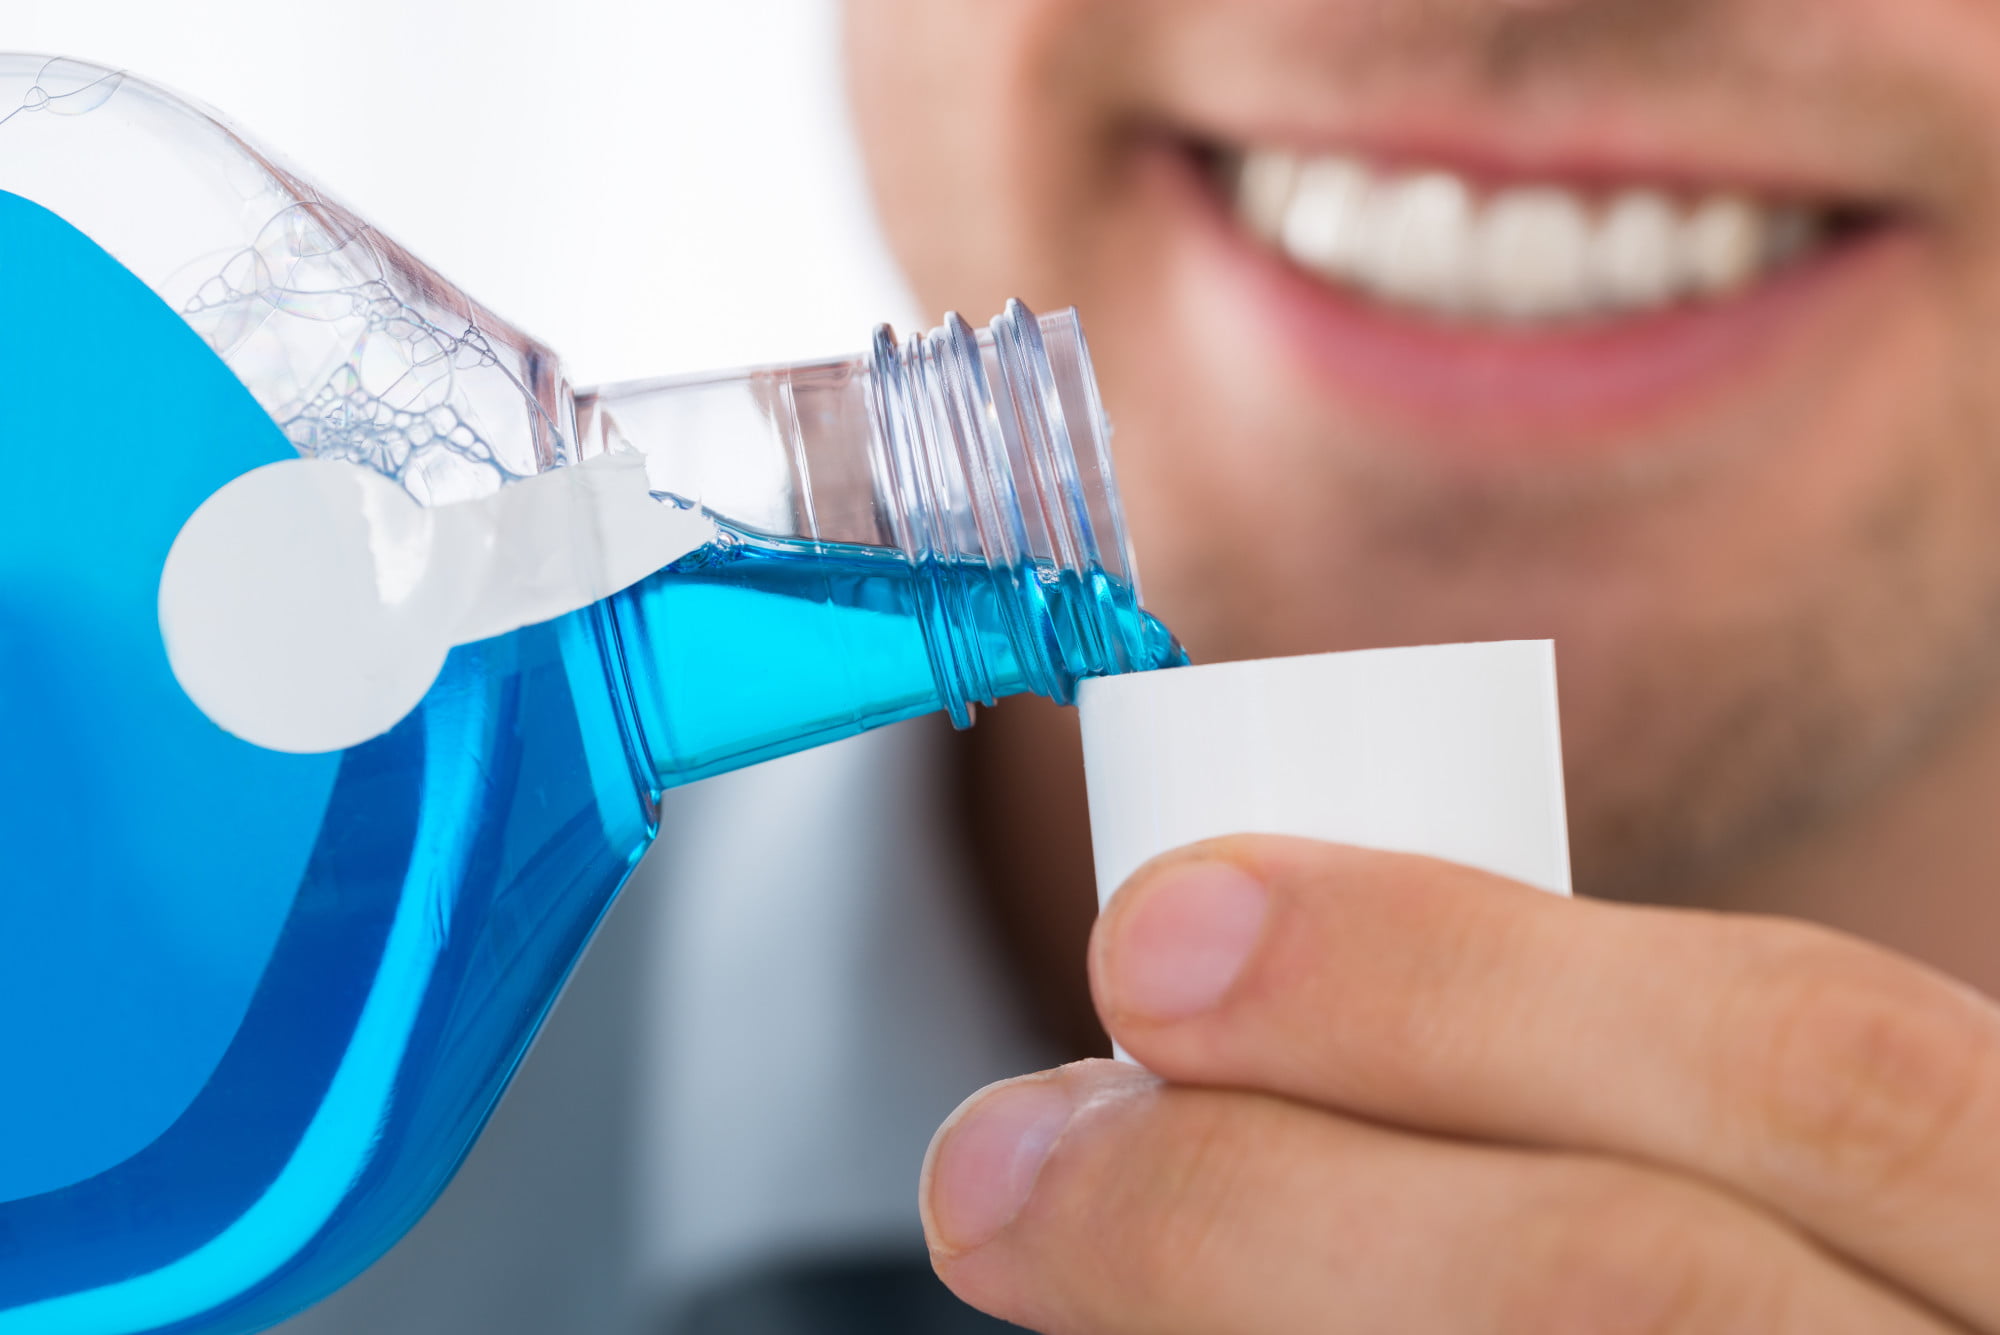 Did you know that not all mouthwash is created equal these days? Here are the many different types of mouthwash that exist on the market today.